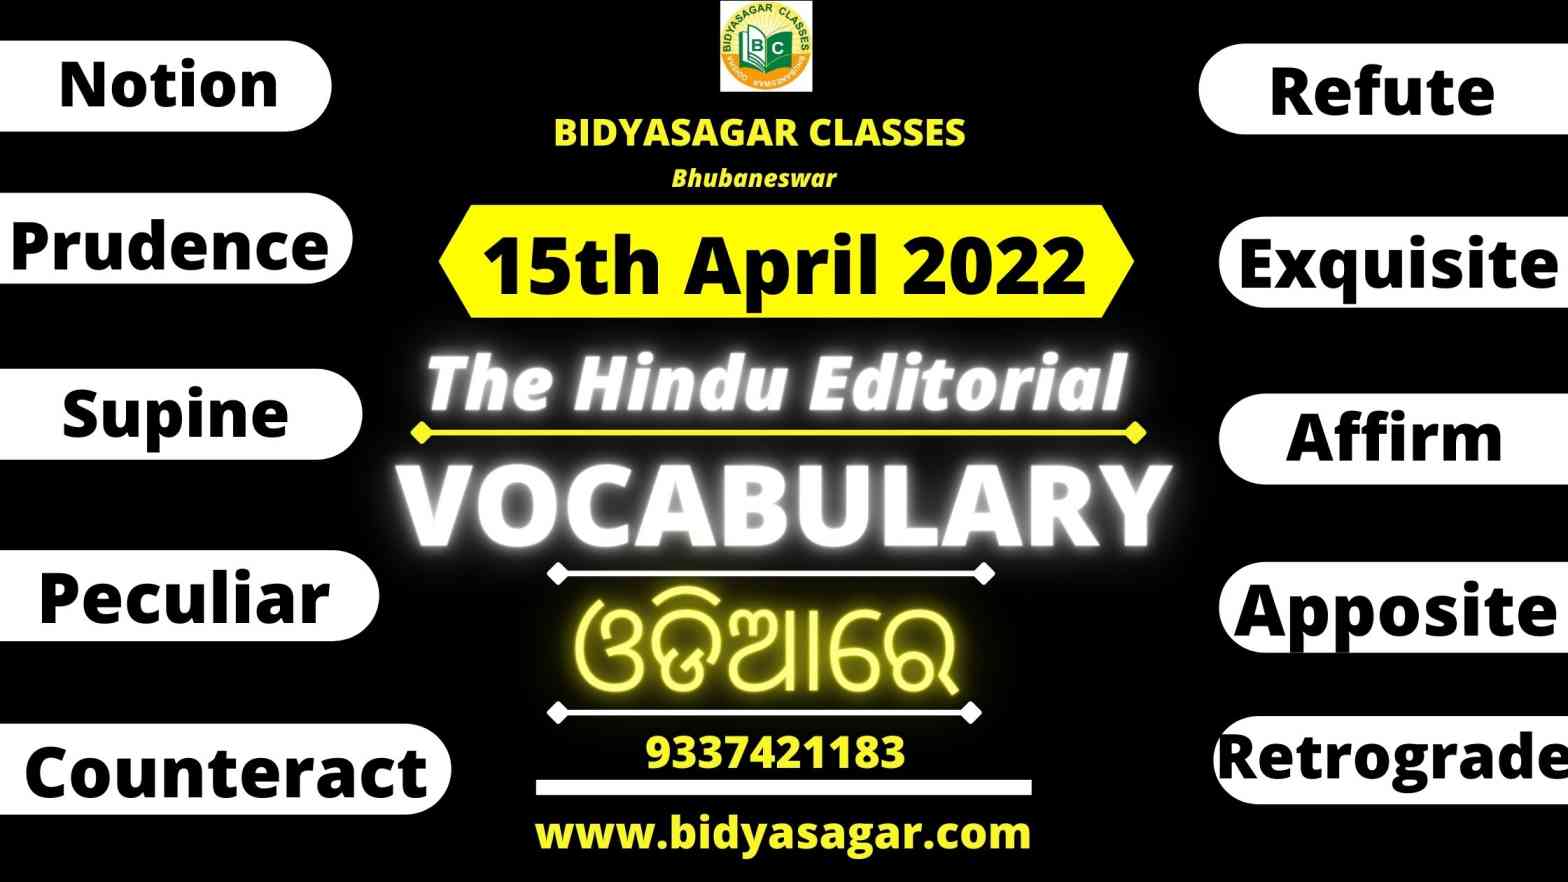 The Hindu Editorial Vocabulary of 15th April 2022